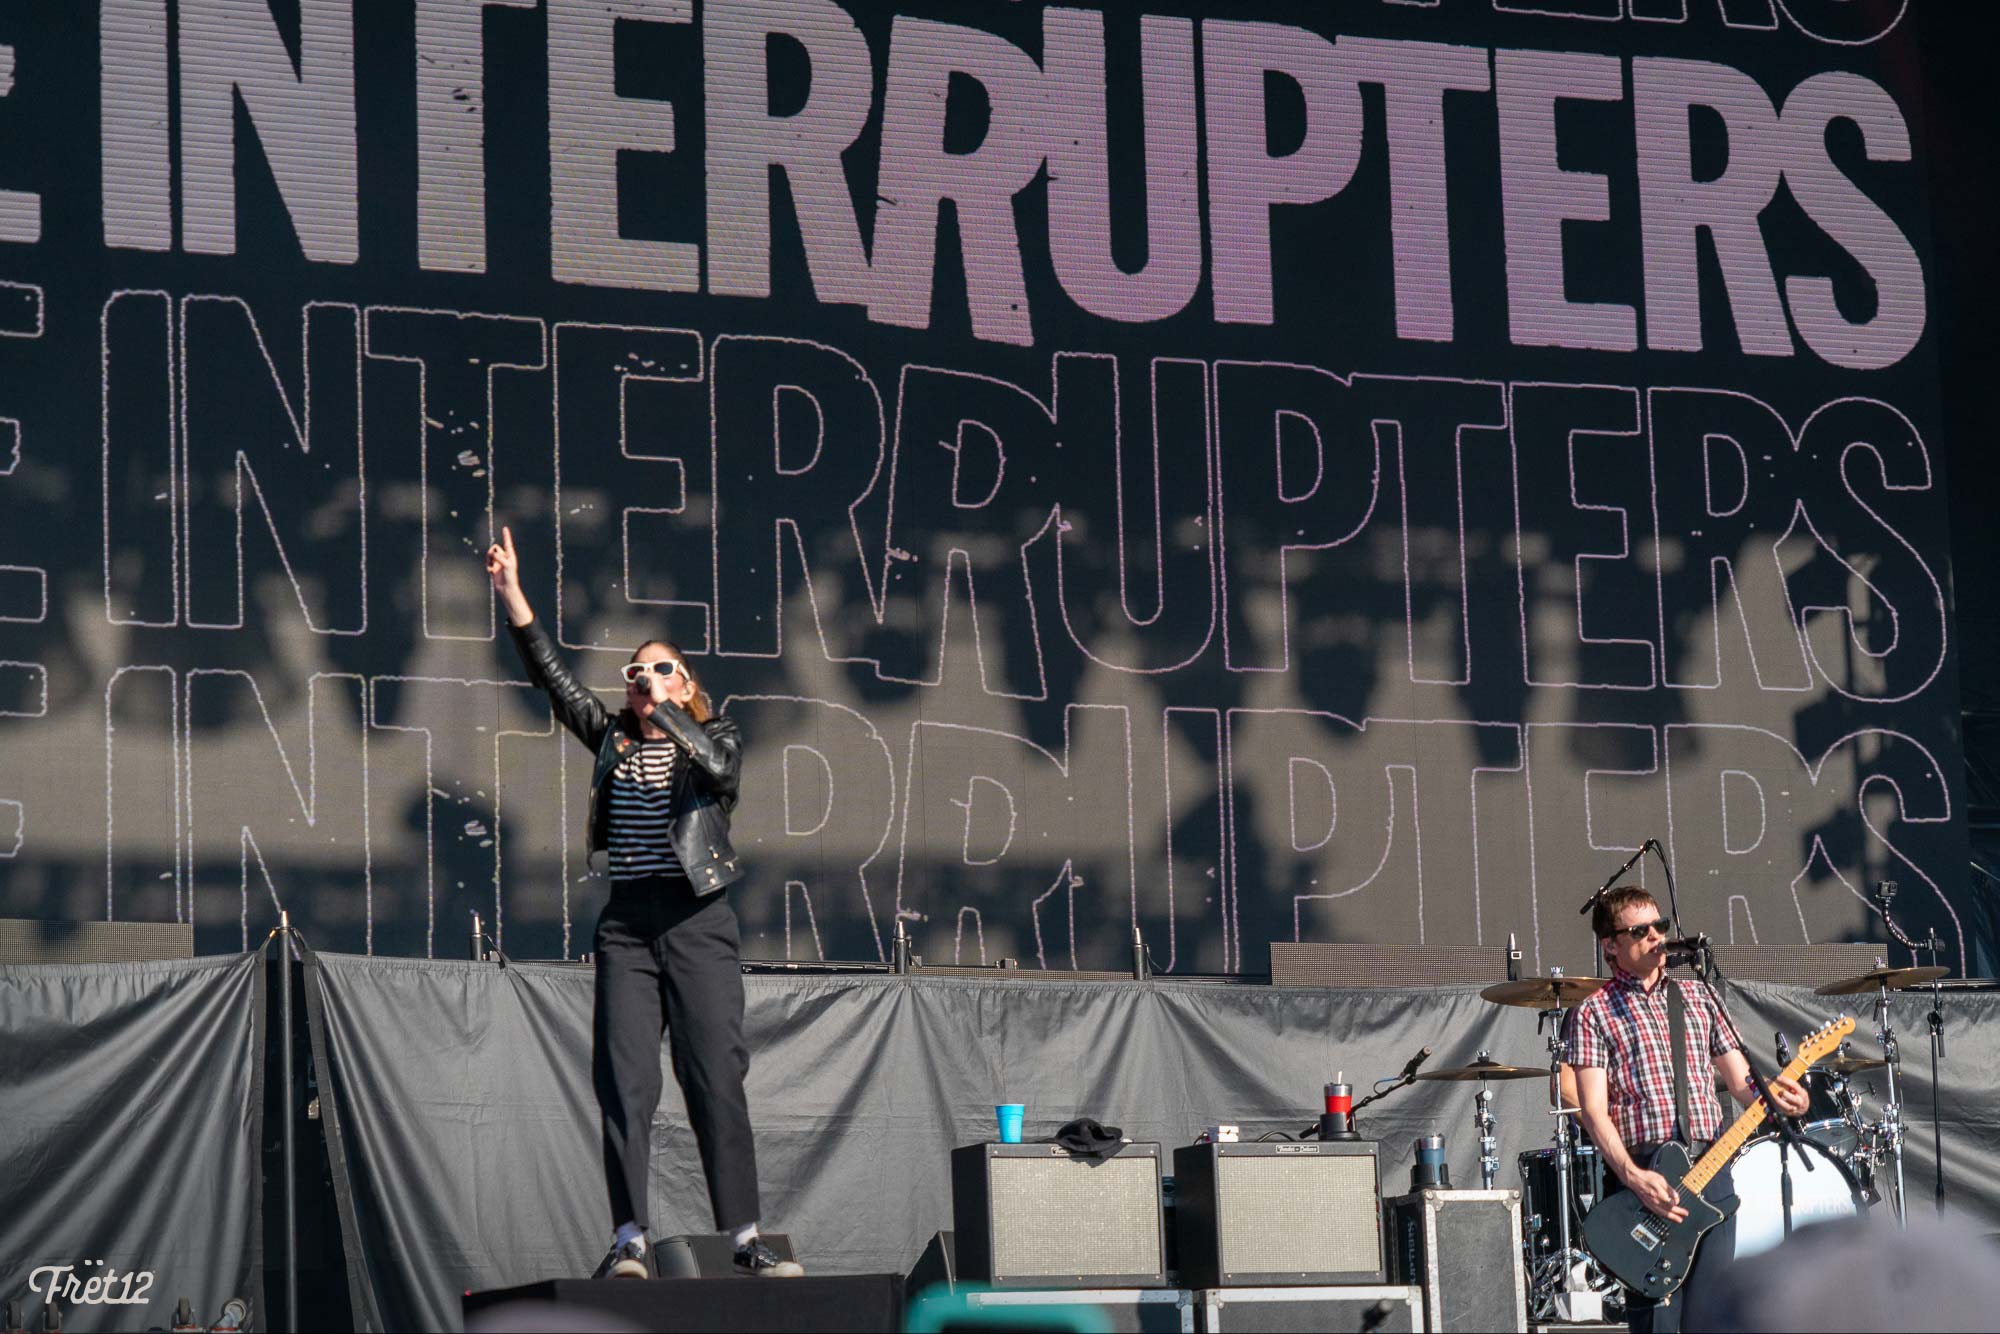 The Interrupters at Riot Fest - Photos by FRET12